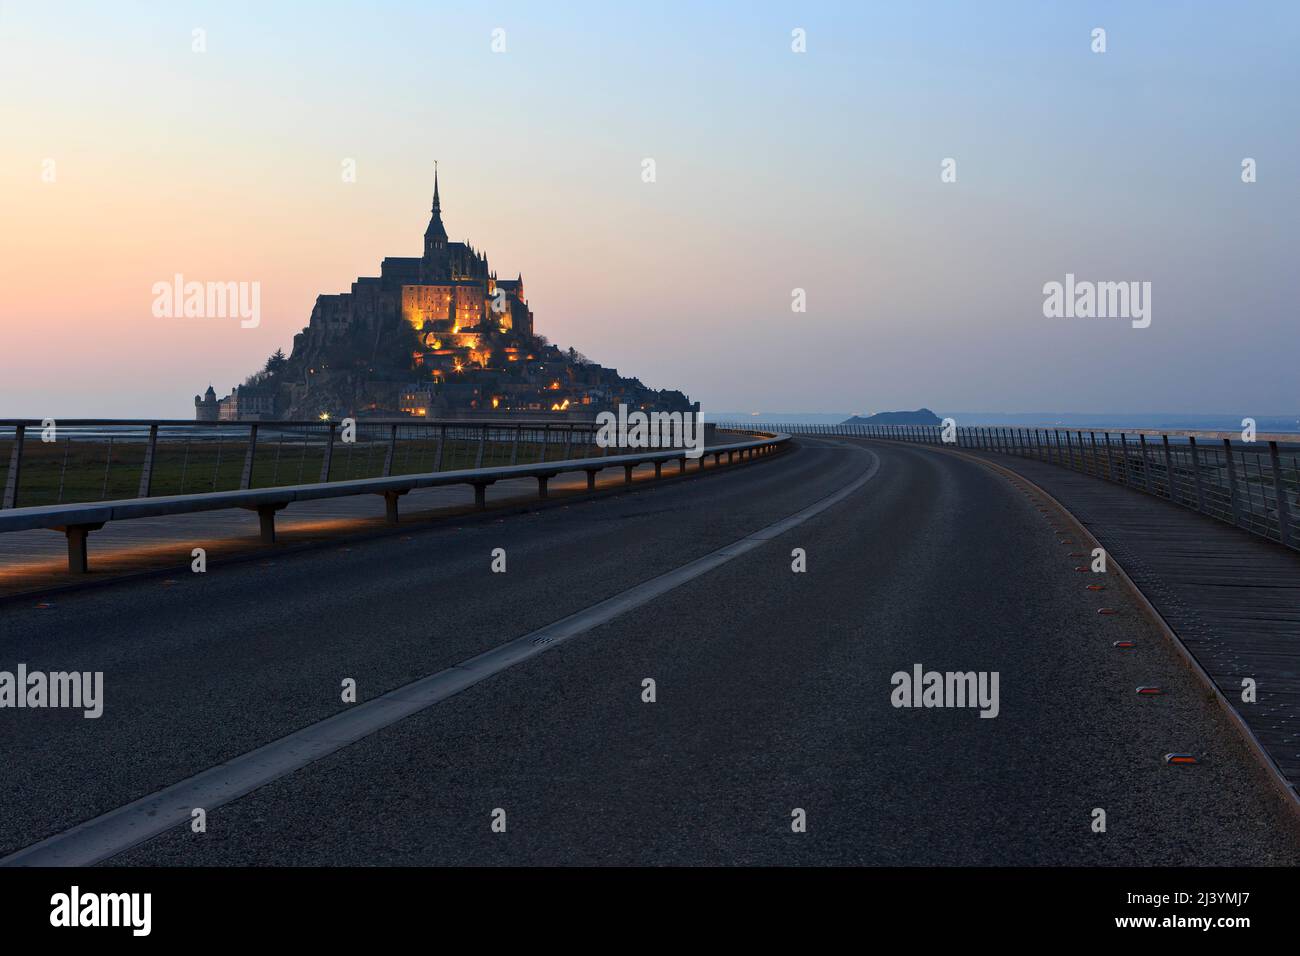 The Mont-Saint-Michel (Saint Michael's Mount), a medieval Christian tidal islet and UNESCO World Heritage Site at twilight in Normandy, France Stock Photo